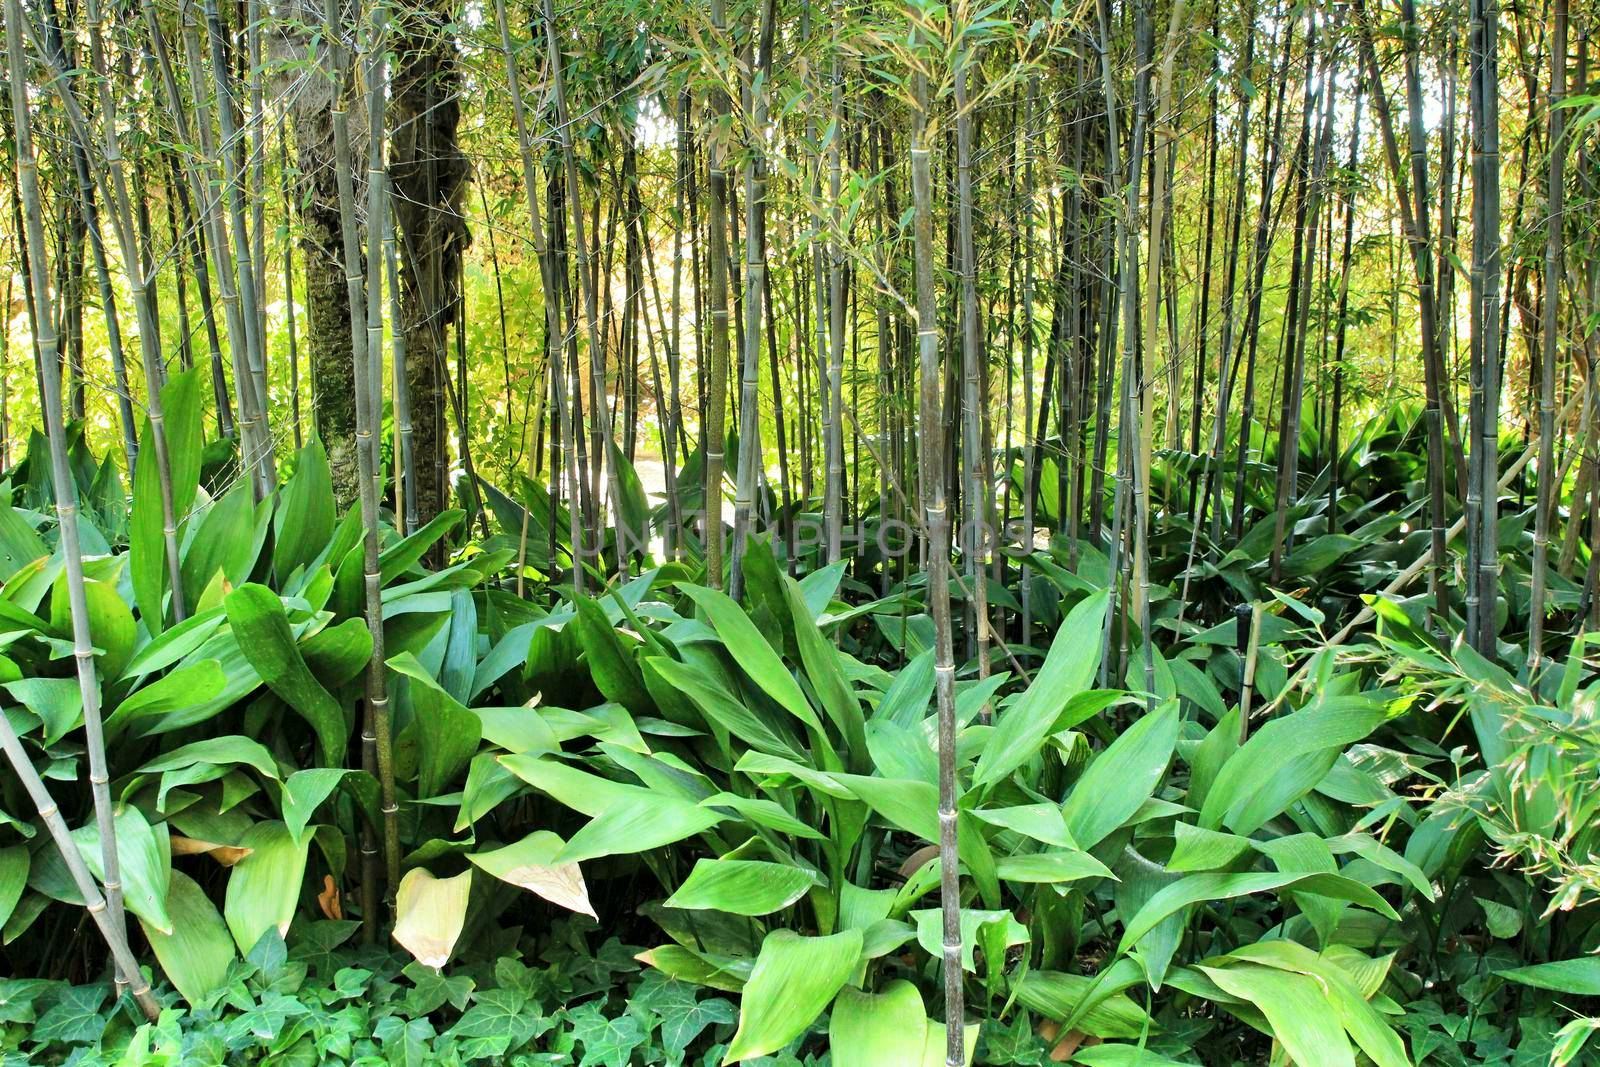 Phyllostachys Nigra bamboo forest in the garden by soniabonet